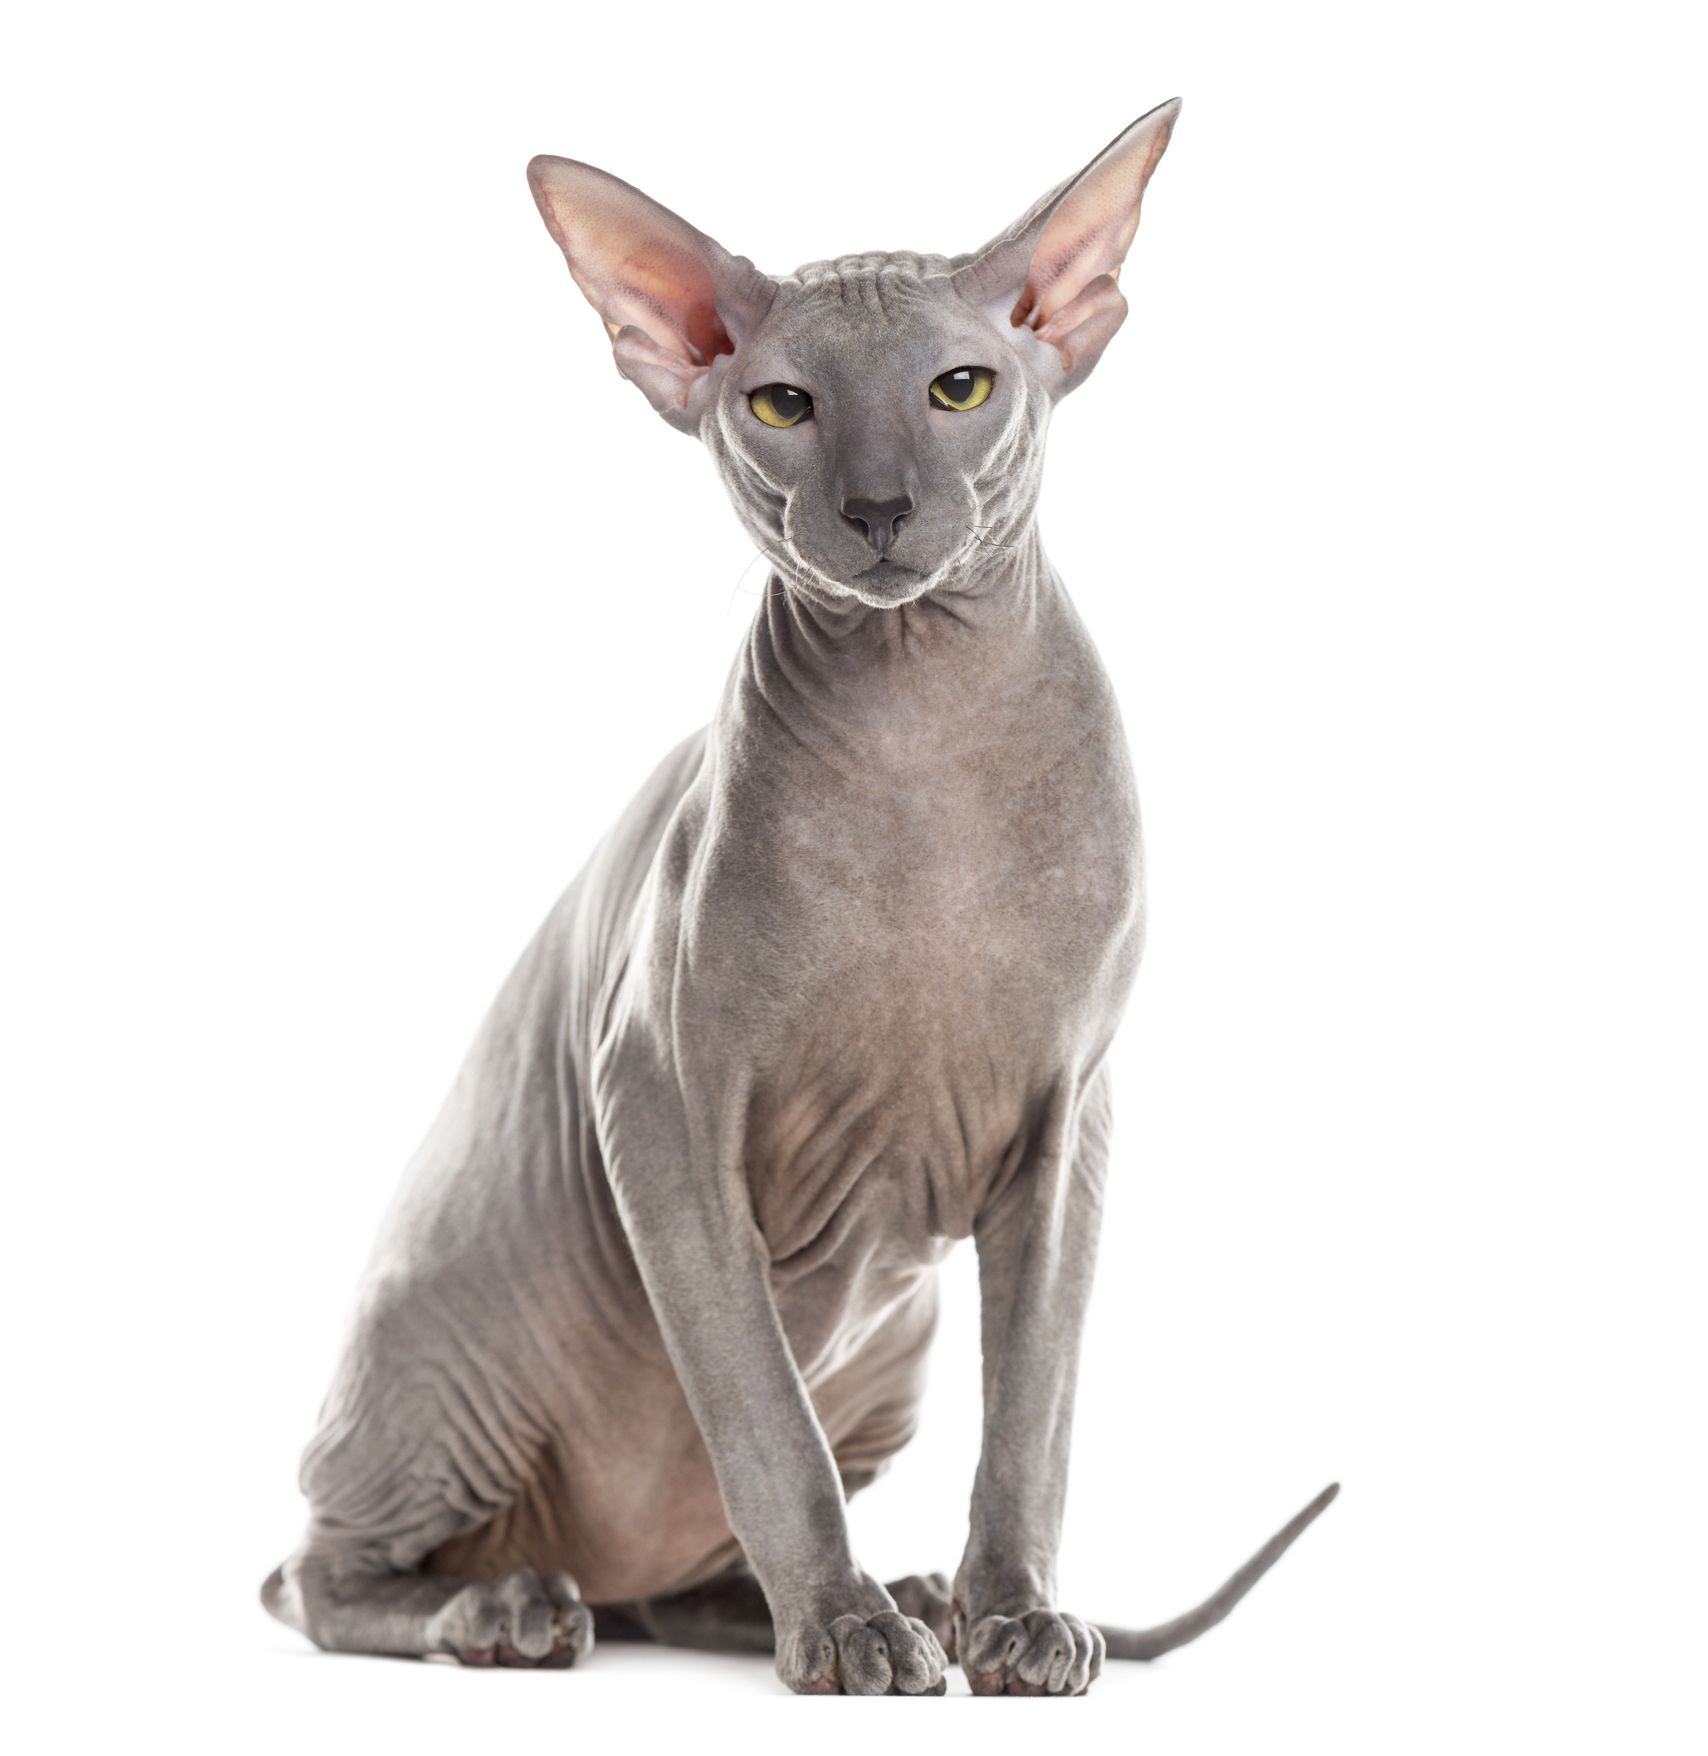 9 Hairless Cat Breeds: Sphynx, Donskoy, and More